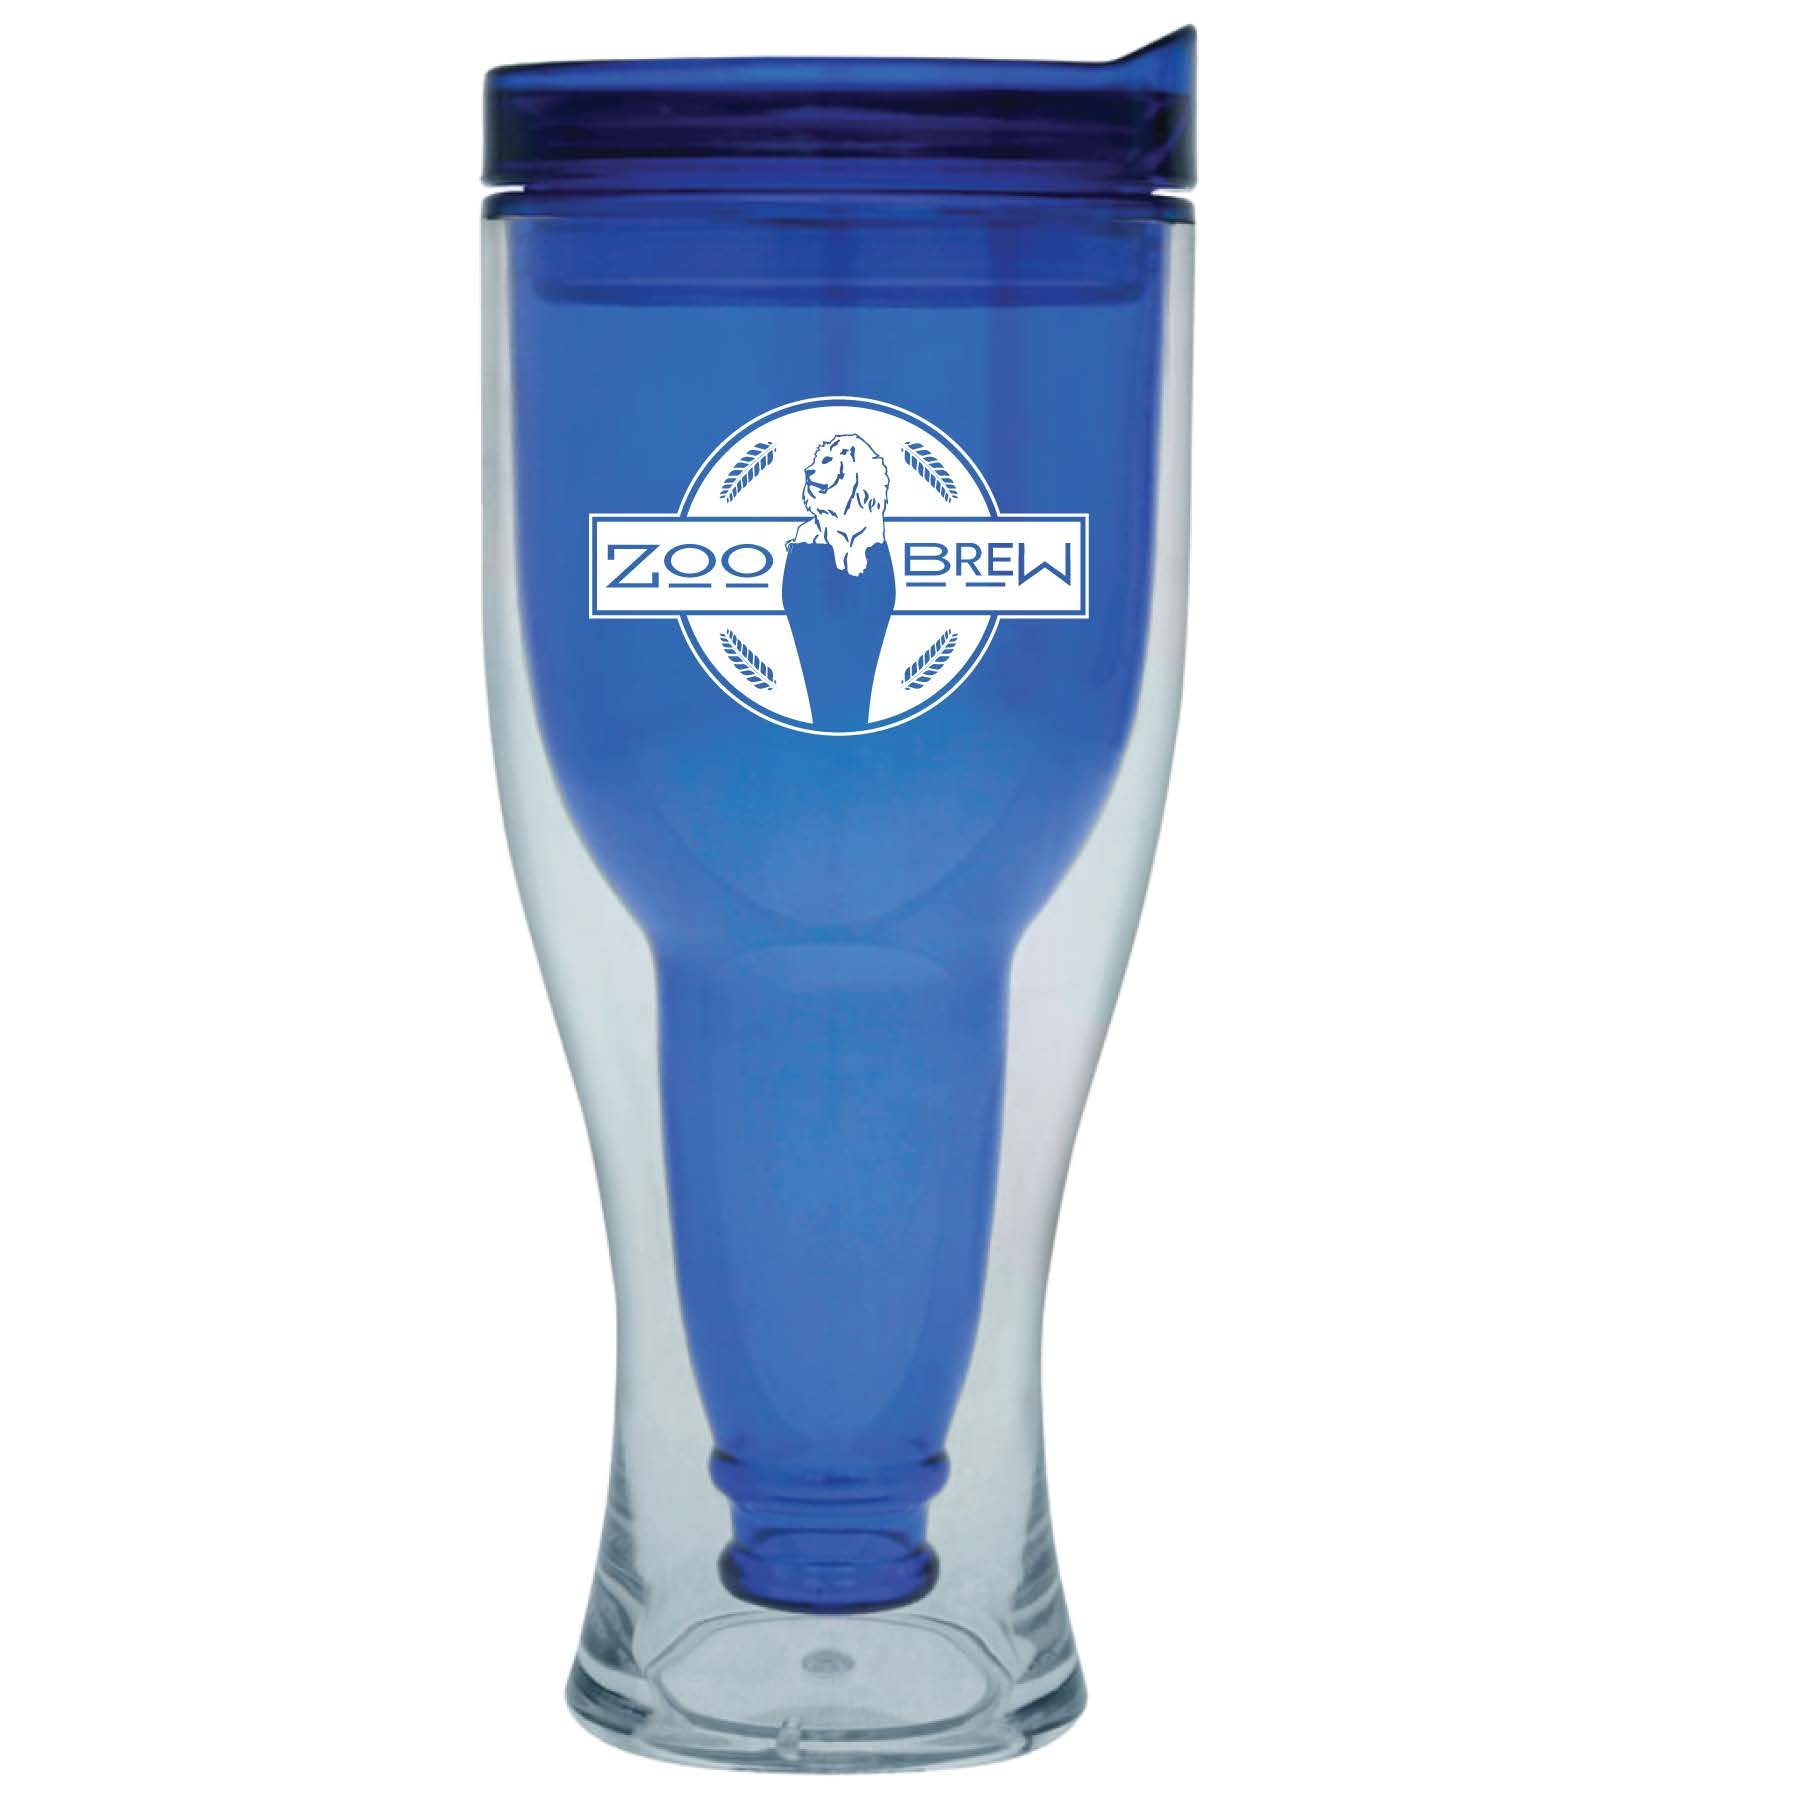 BEER TO GO ZOO BREW TUMBLER BLUE